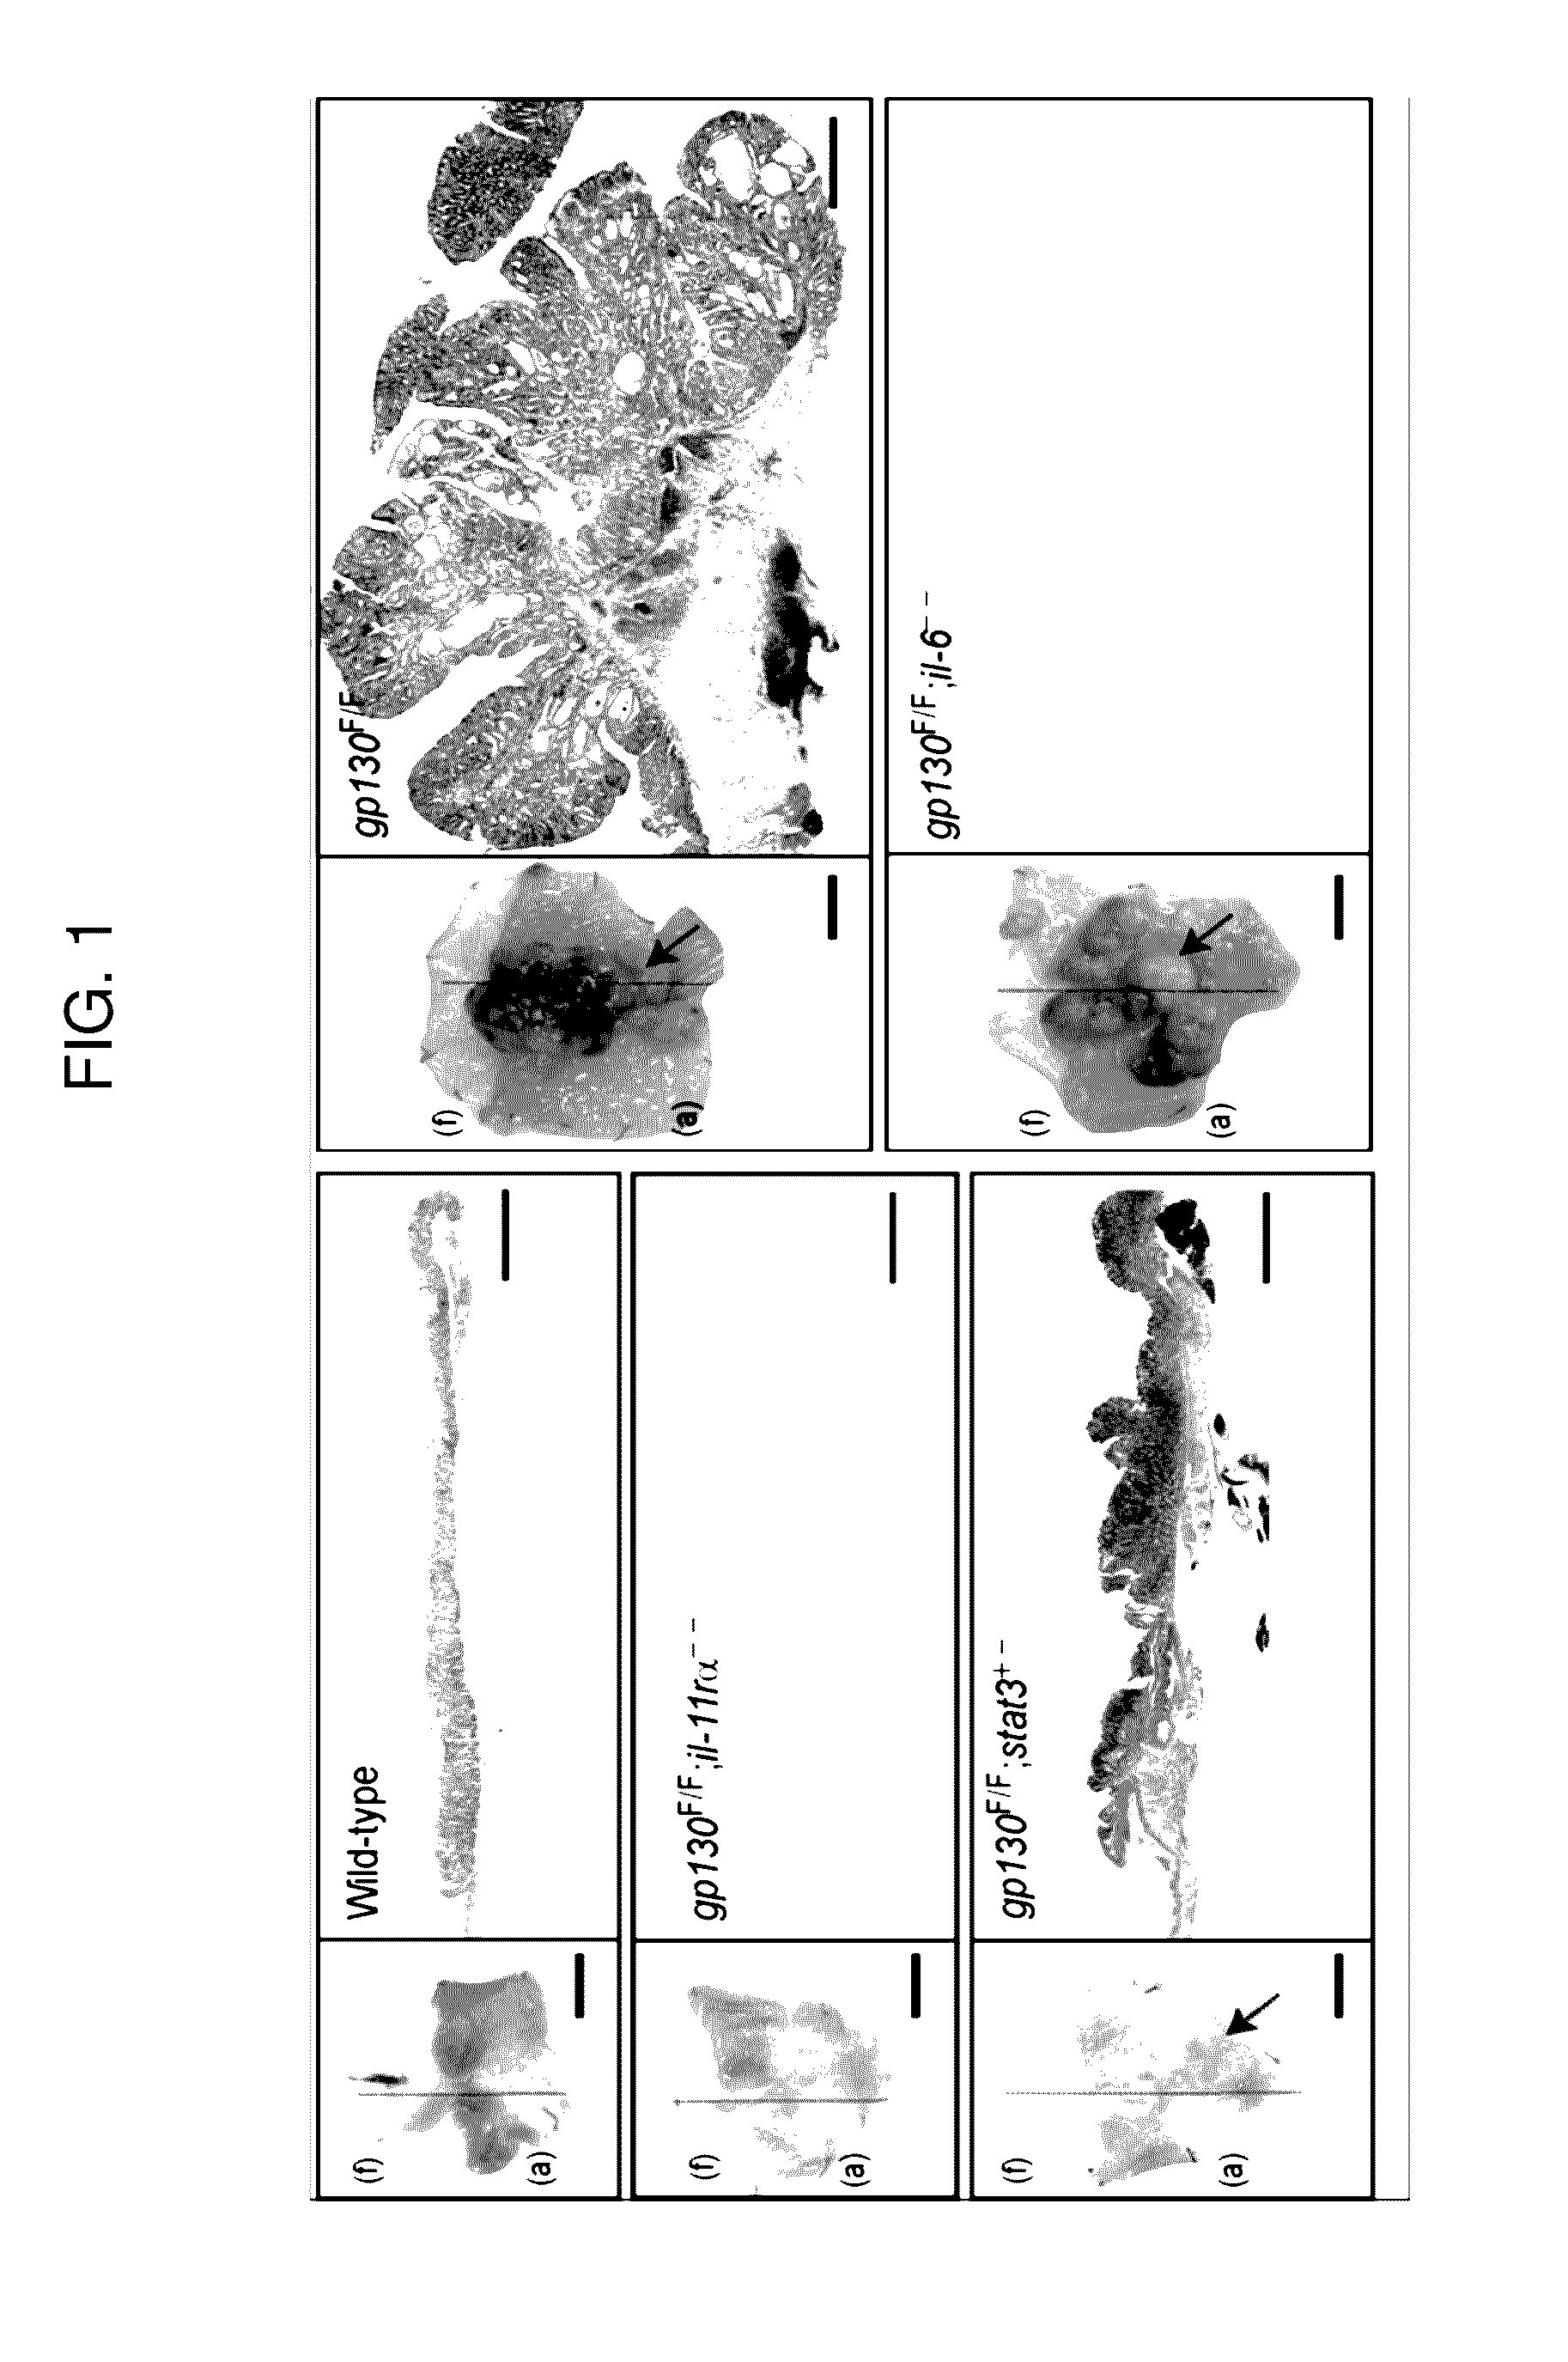 Biomarkers for gastric cancer and uses thereof